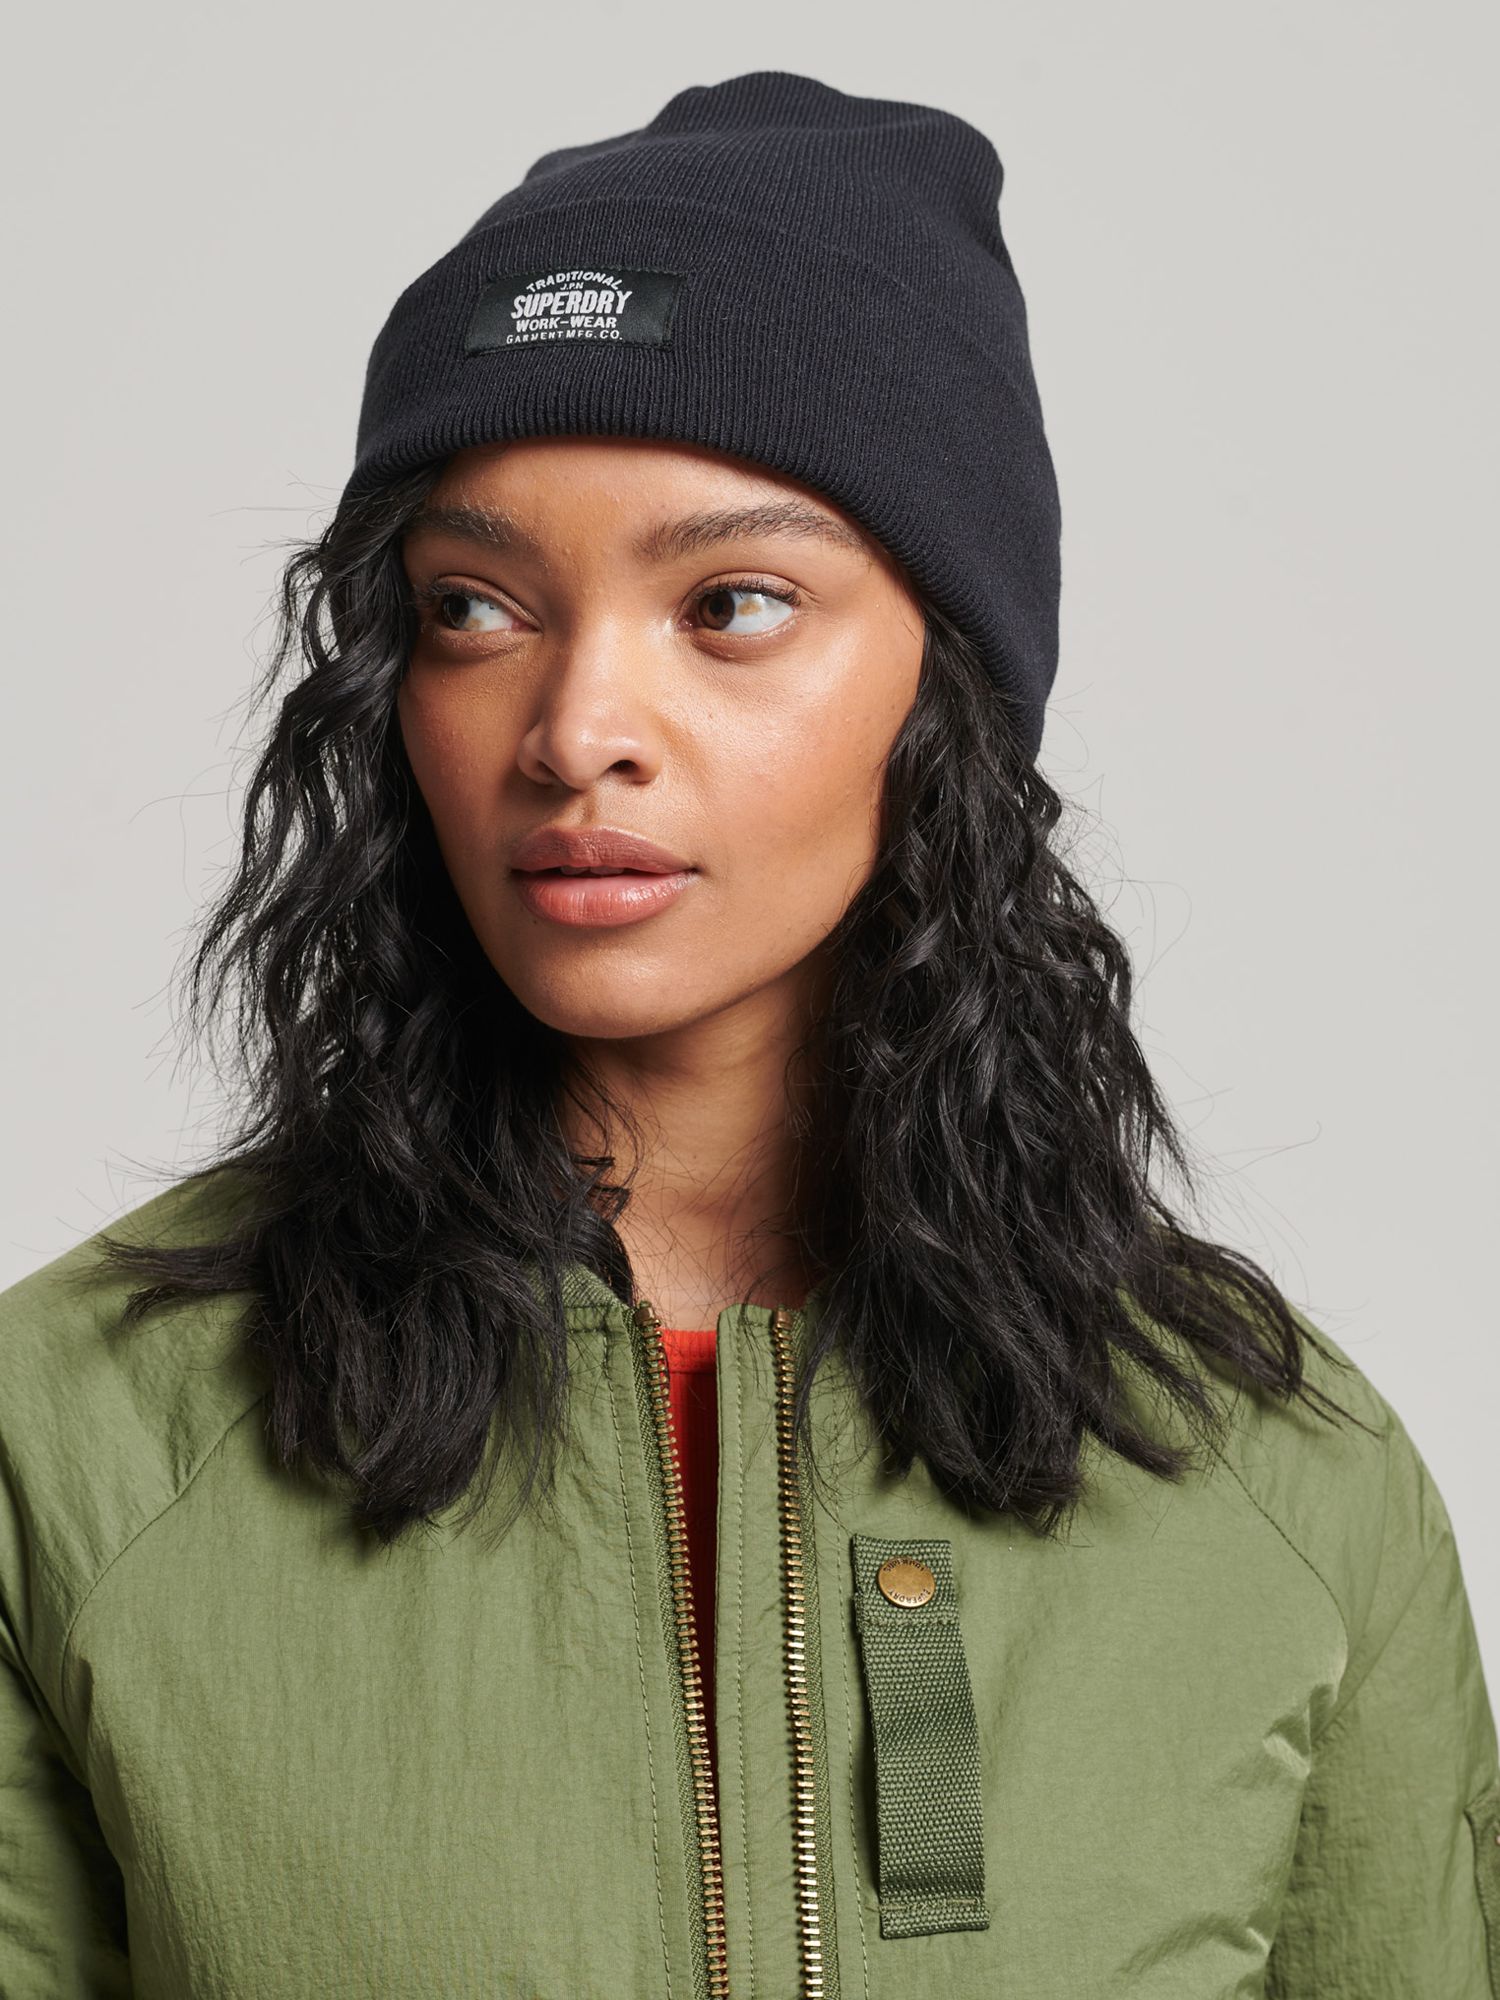 Superdry Classic Knitted Beanie Hat, New Jet Black at John Lewis & Partners